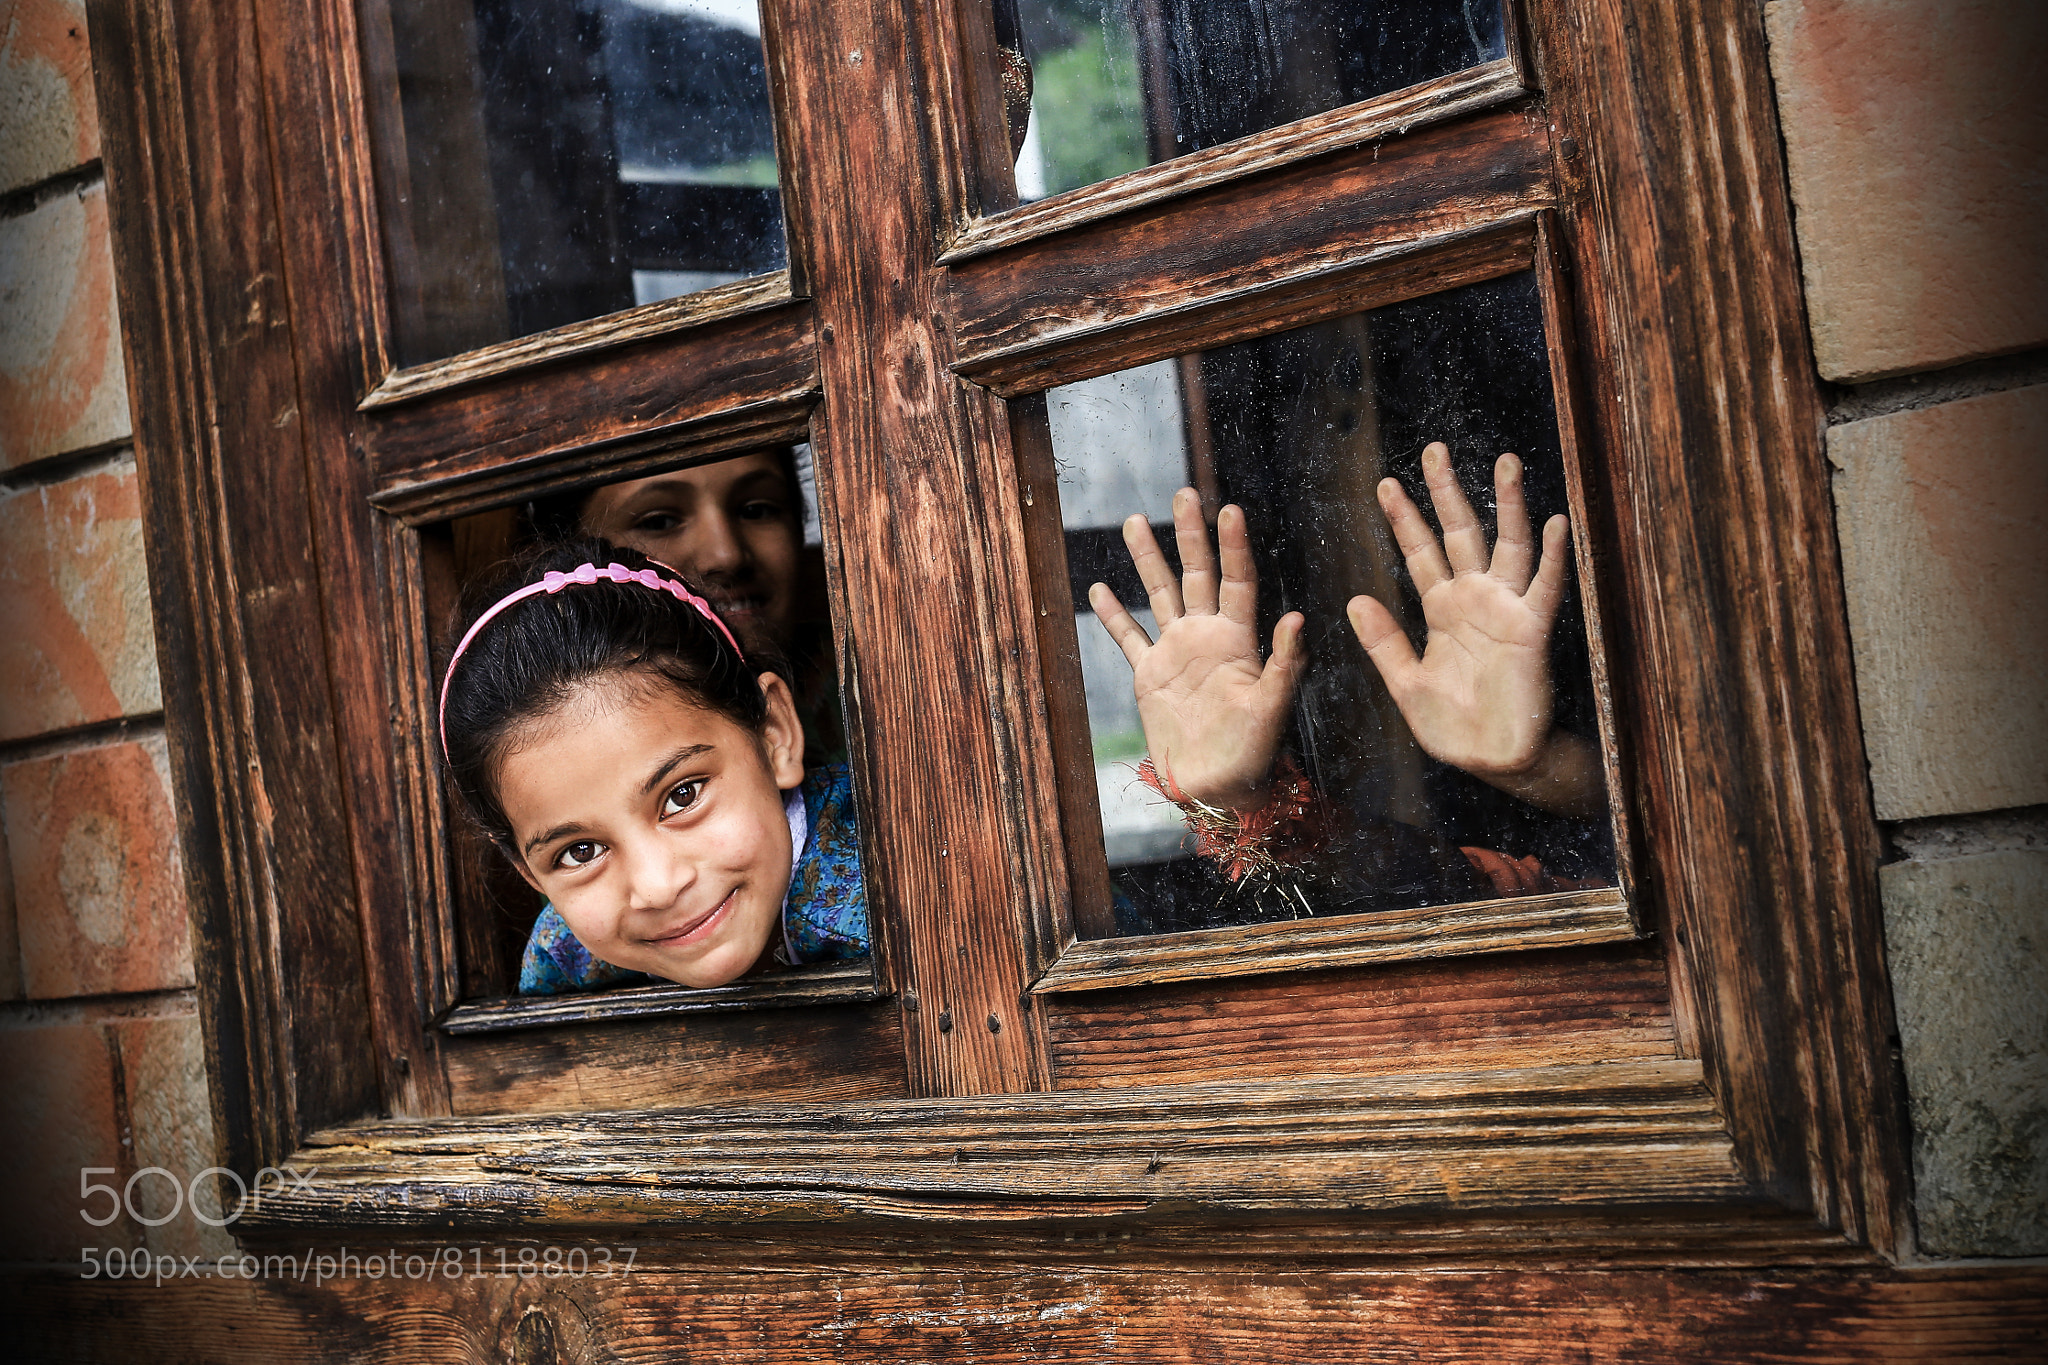 Photograph Innocent Looking by Hamed AlGhanboosi on 500px